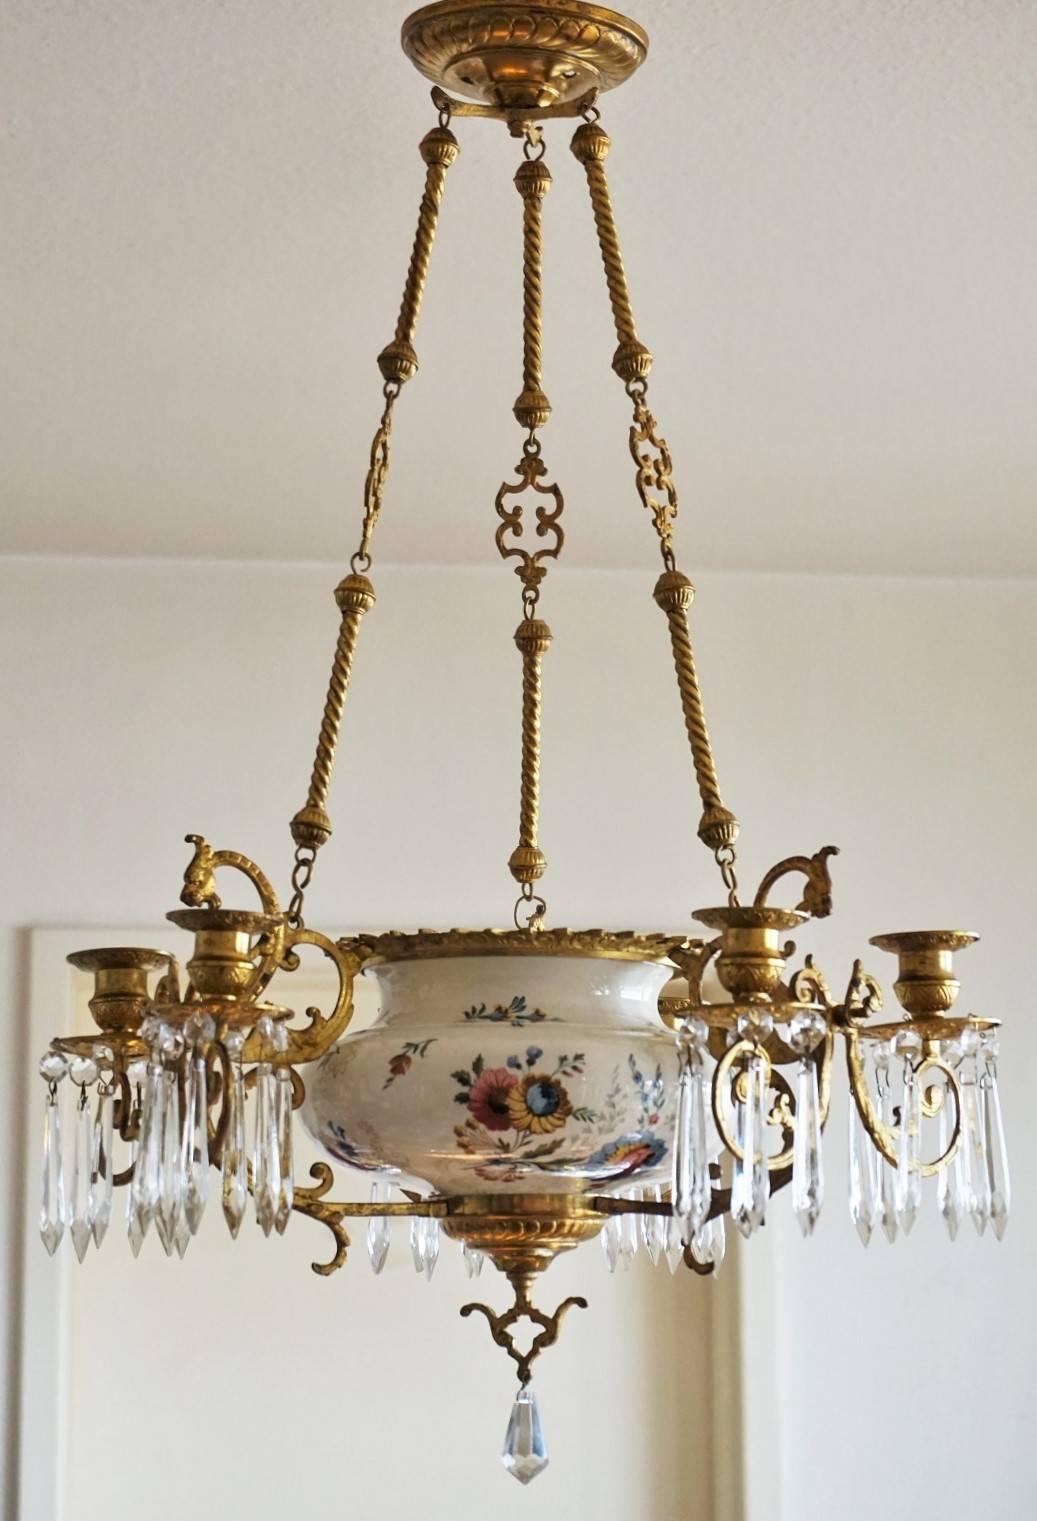 19th Century French Dóre Bronze and Faience Candle Chandelier, Choisy-le-Roy (Neugotik)